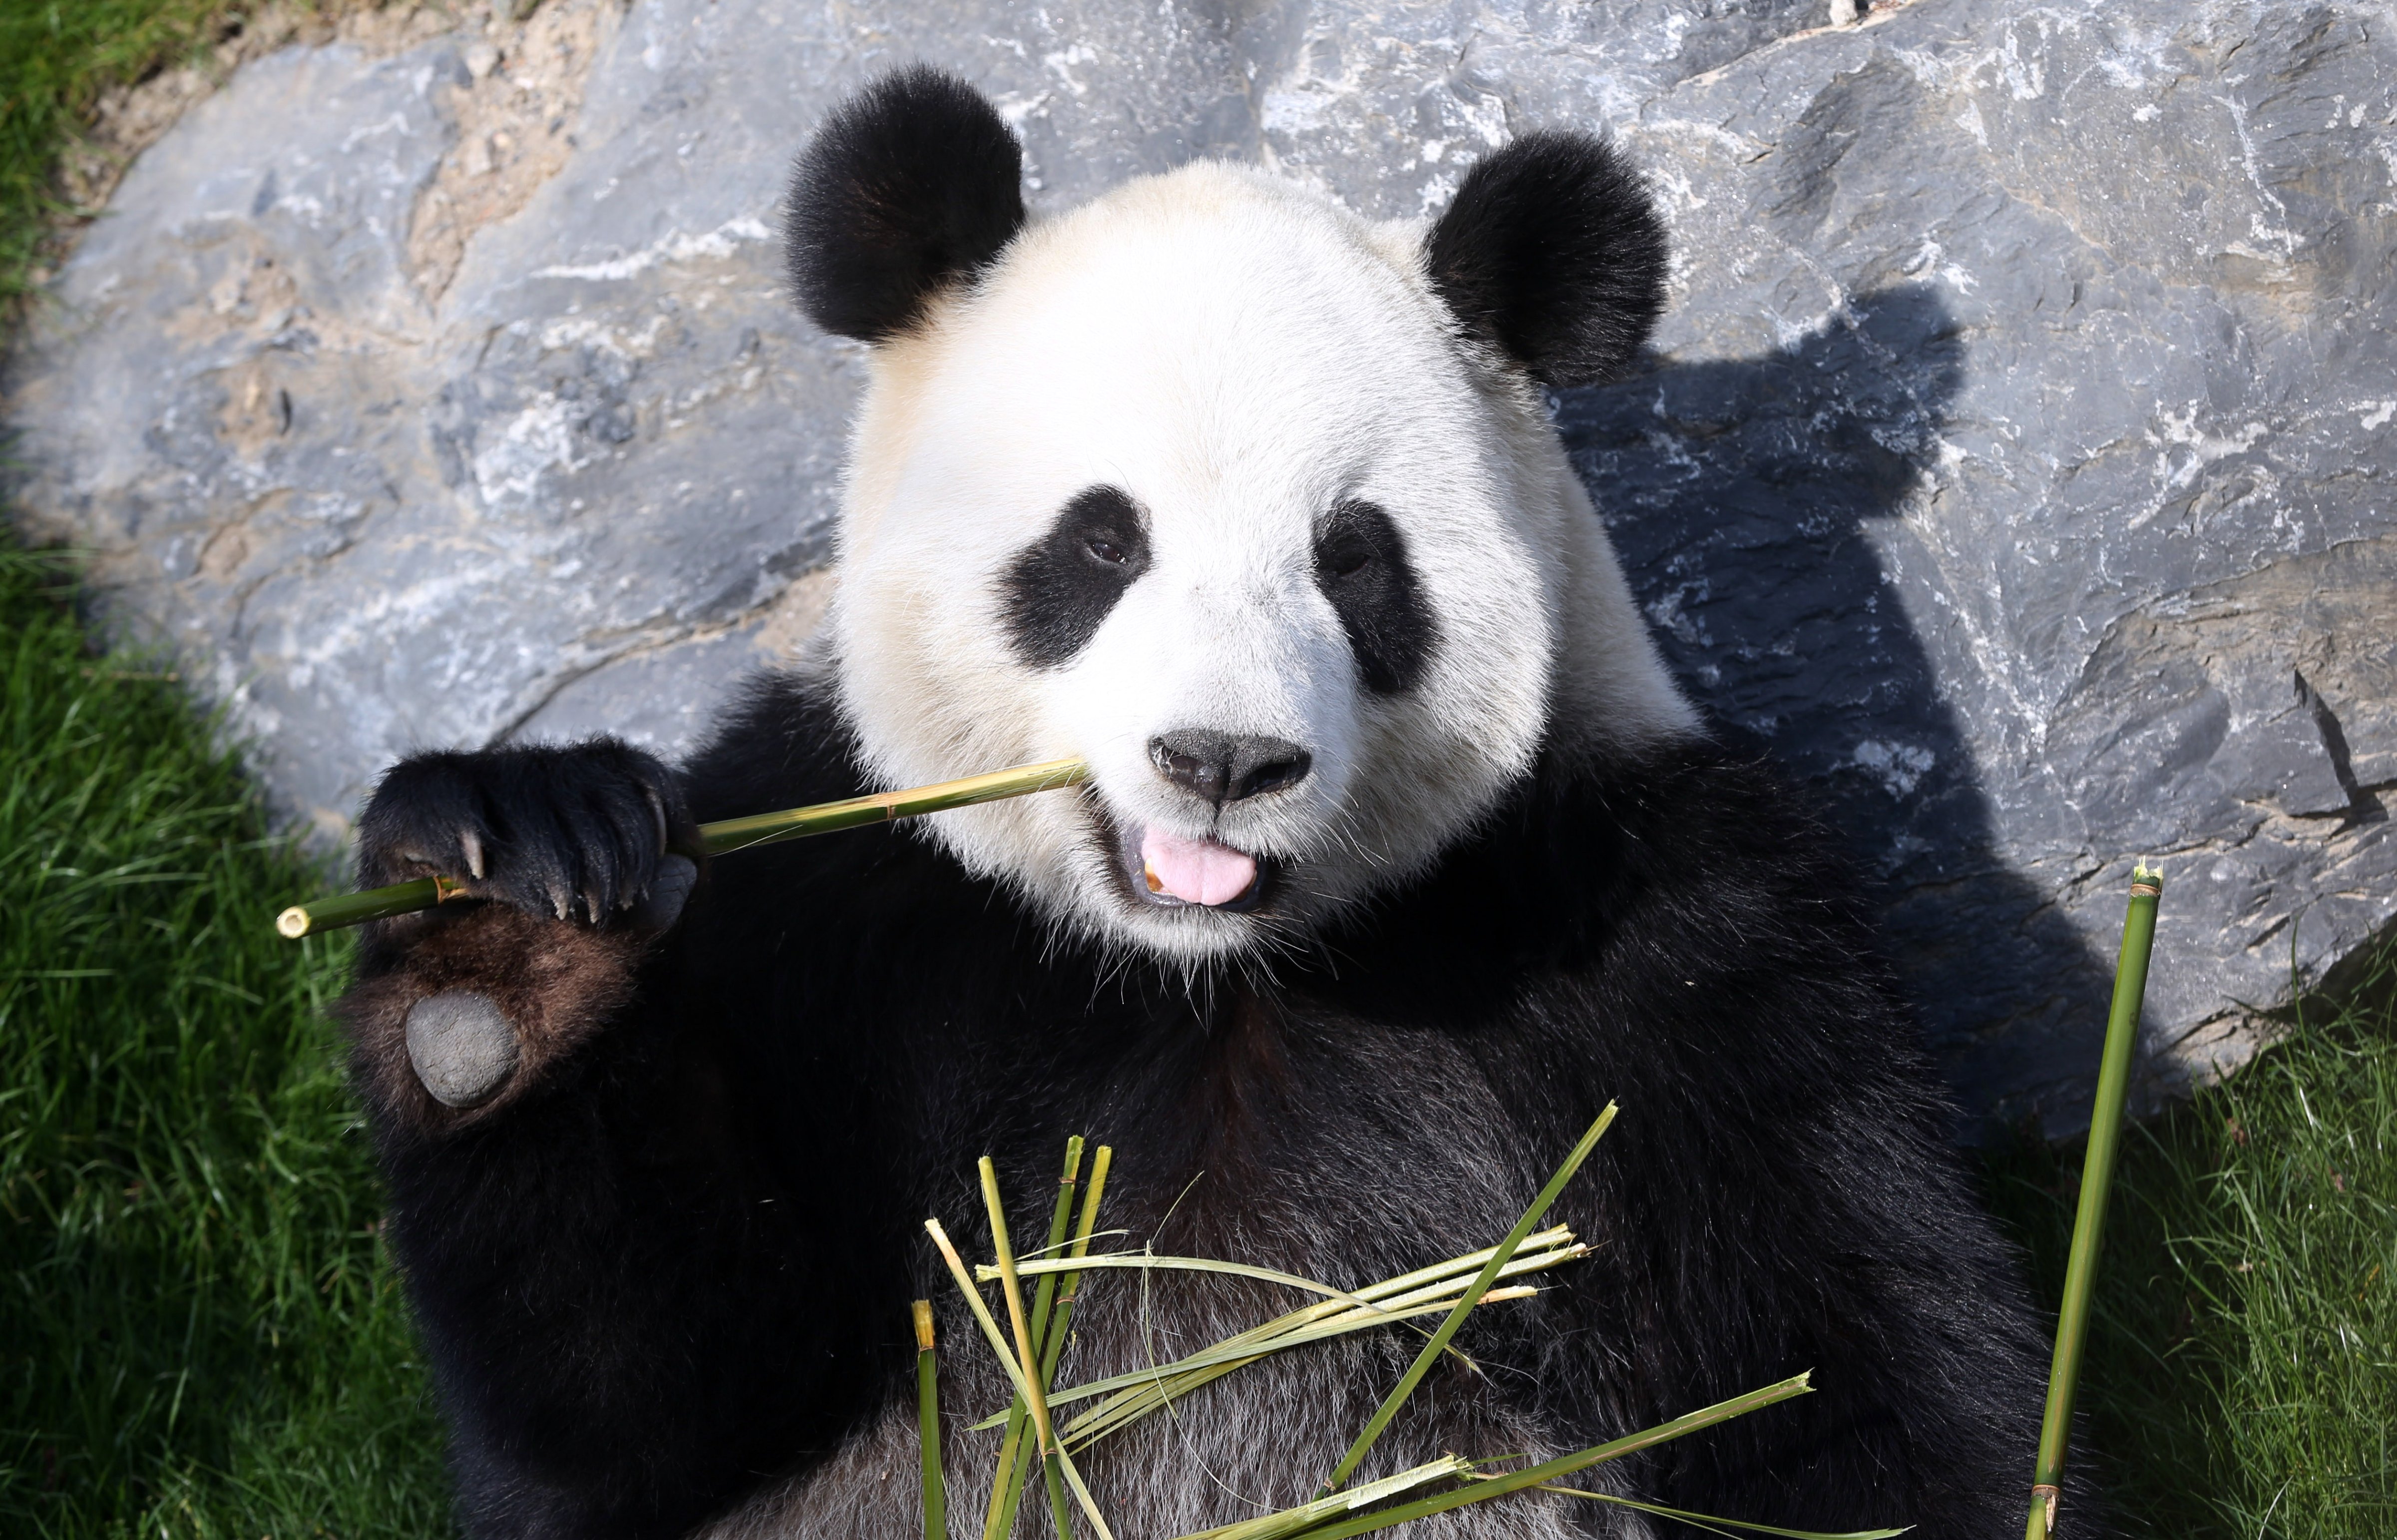 A photo taken on April 1, 2014 shows the giant panda Hao Hao eating bamboo at Pairi Daiza animal park in Brugelette, Belgium.